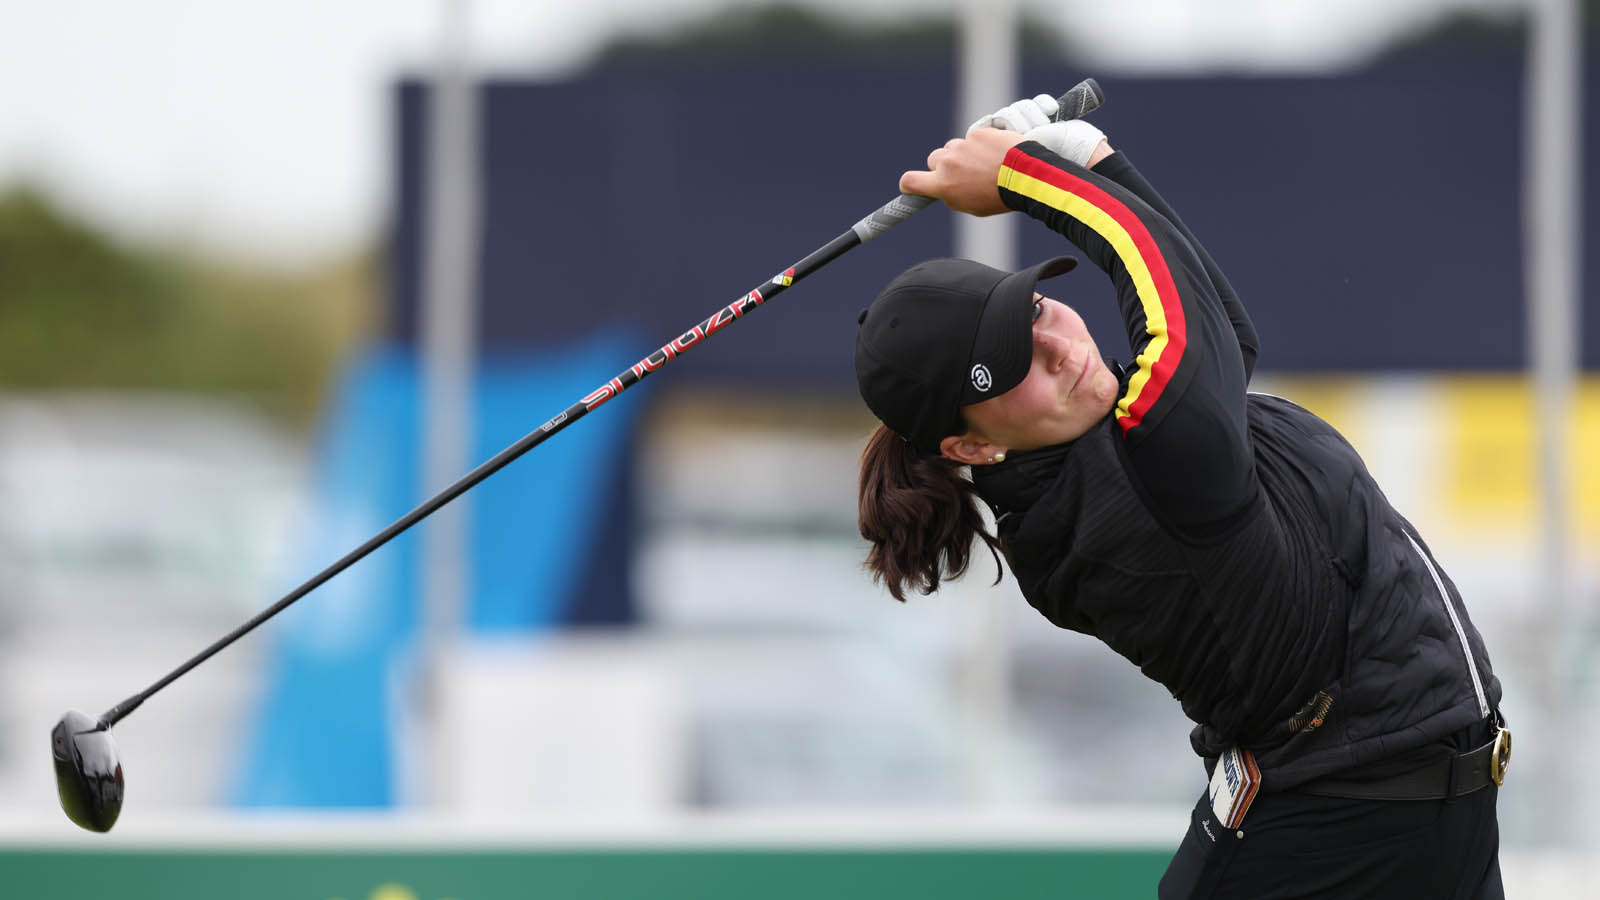 Charlotte Back vom GC St. Leon-Rot (© Patrick Bolger/R&A/R&A via Getty Images)